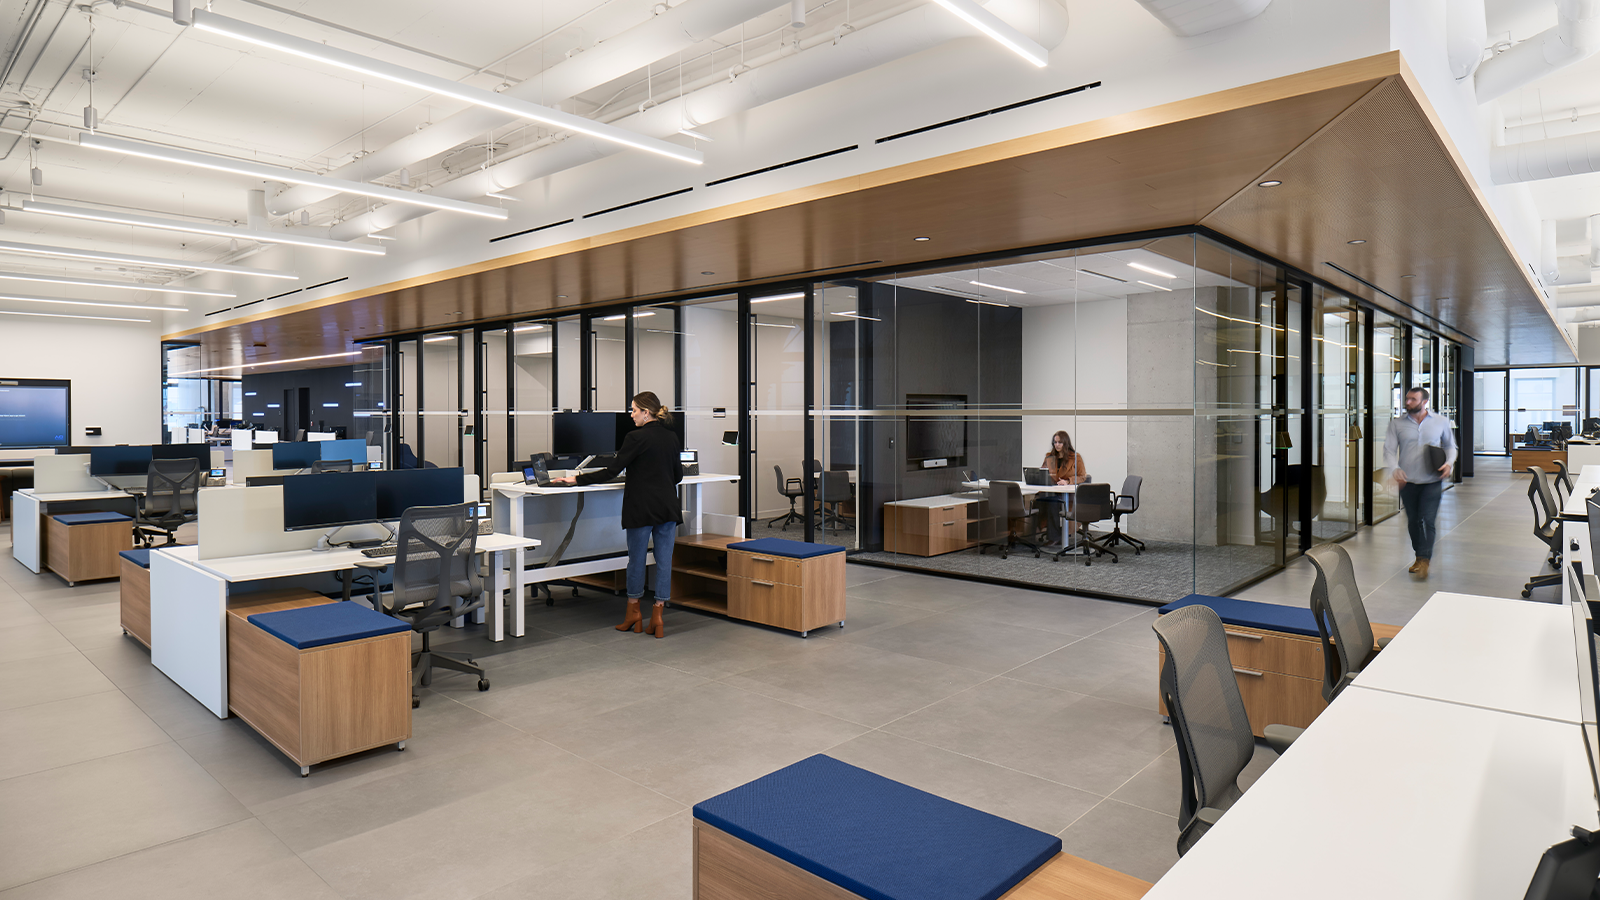 Hybrid workplace architecture and design in ACI Worldwide's Miami Headquarters